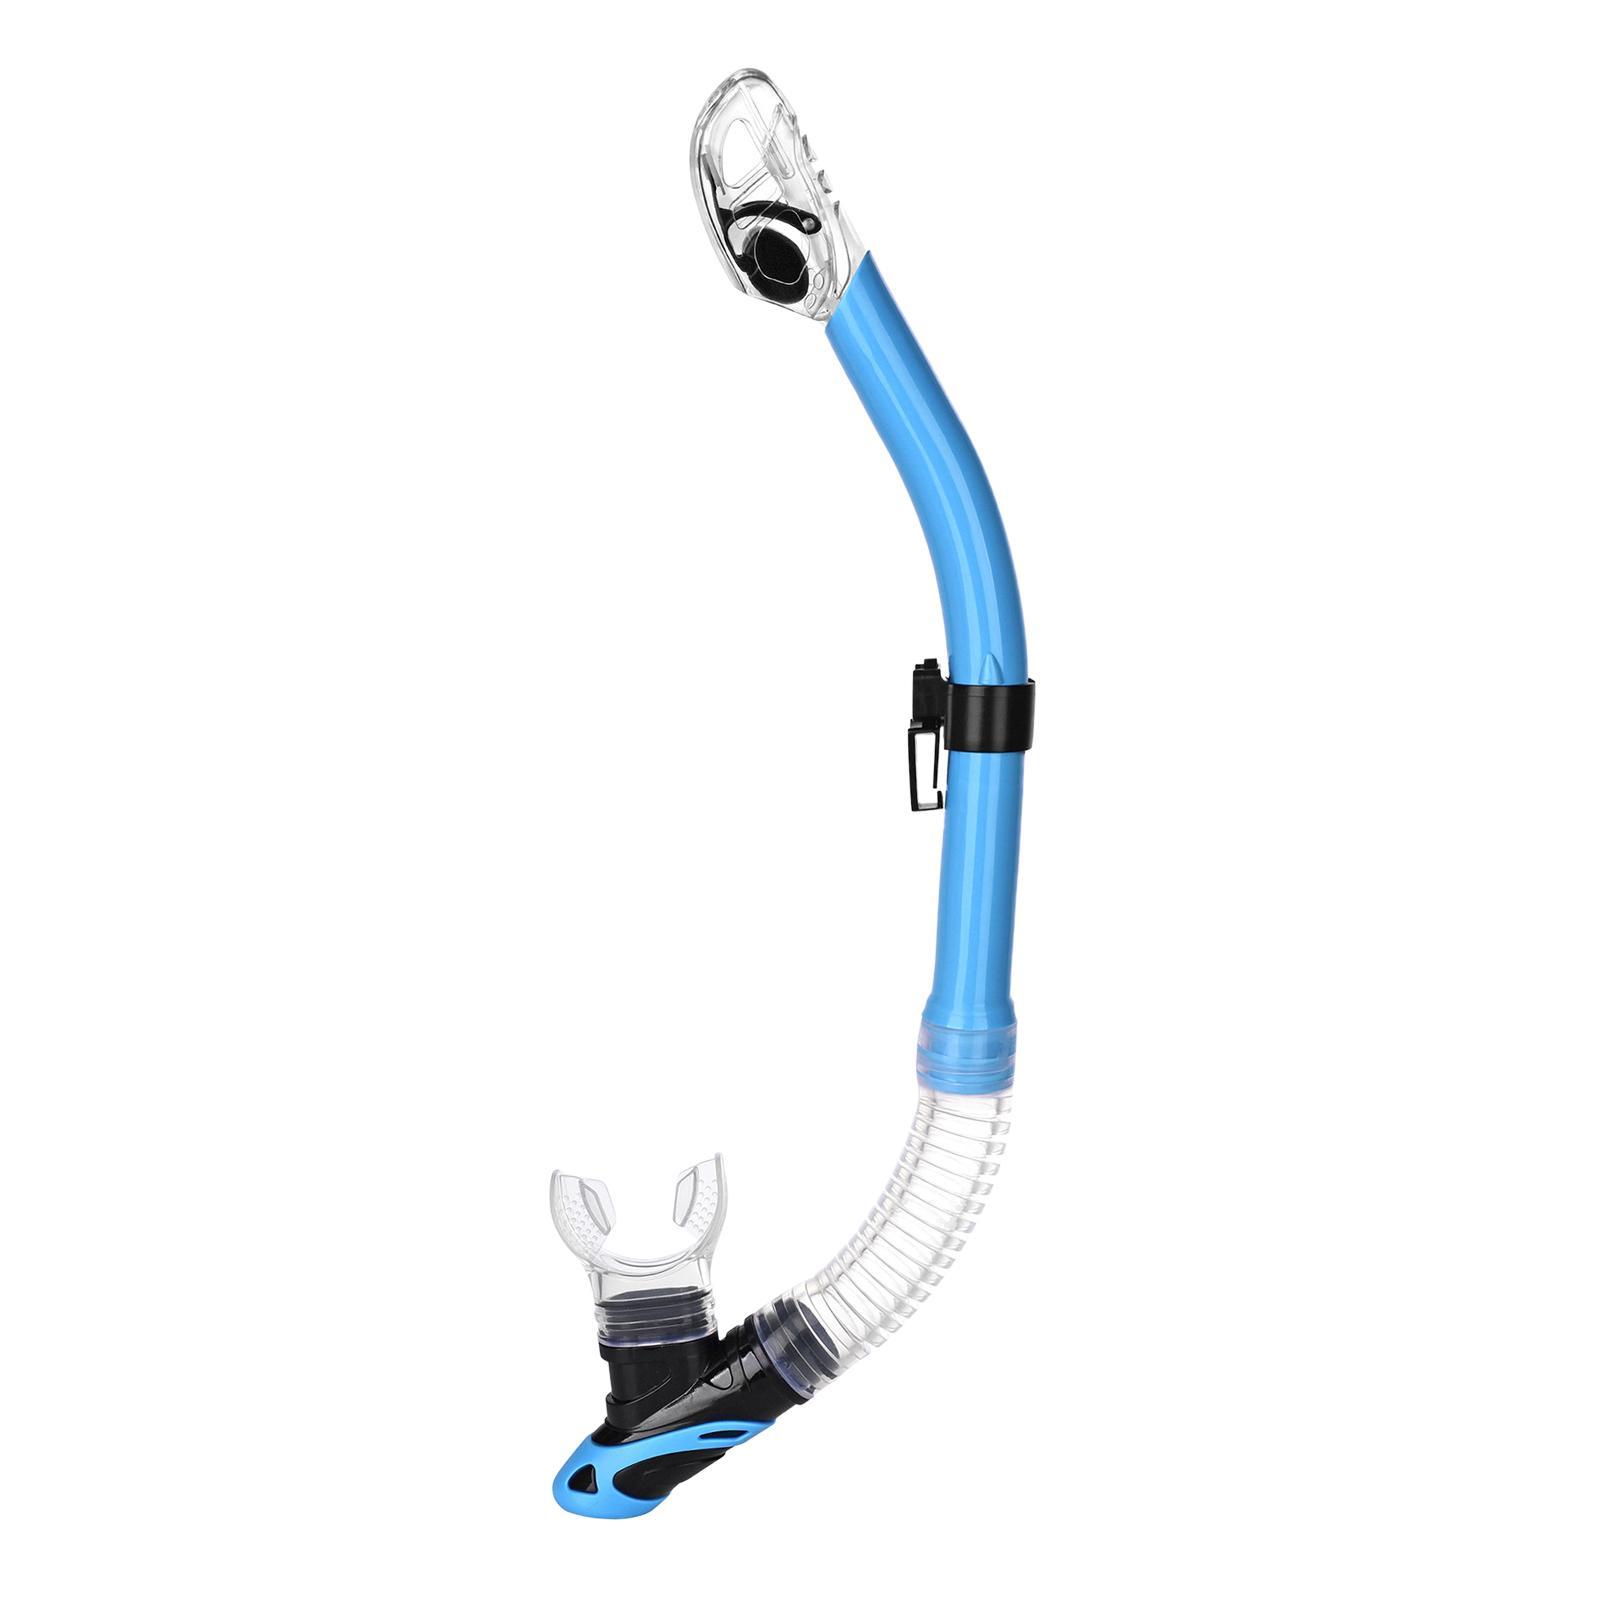 Dry Snorkel Anti Leak Easily Breathe for Adults and Teens Scuba Diving Training - Blue